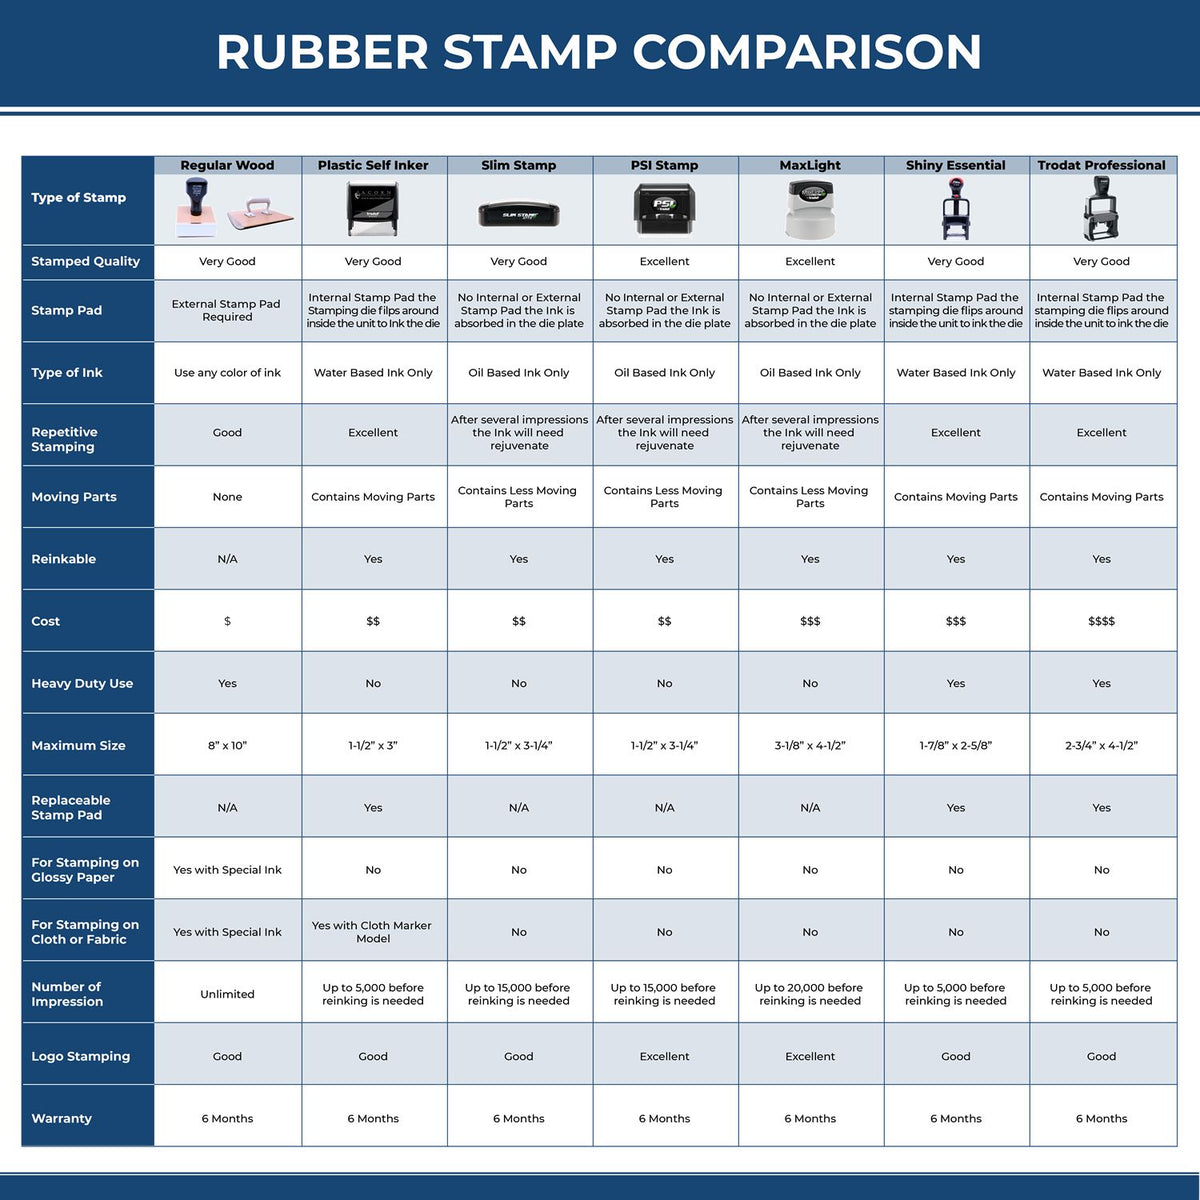 A comparison chart for the different types of mount models available for the Premium MaxLight Pre-Inked South Carolina Engineering Stamp.